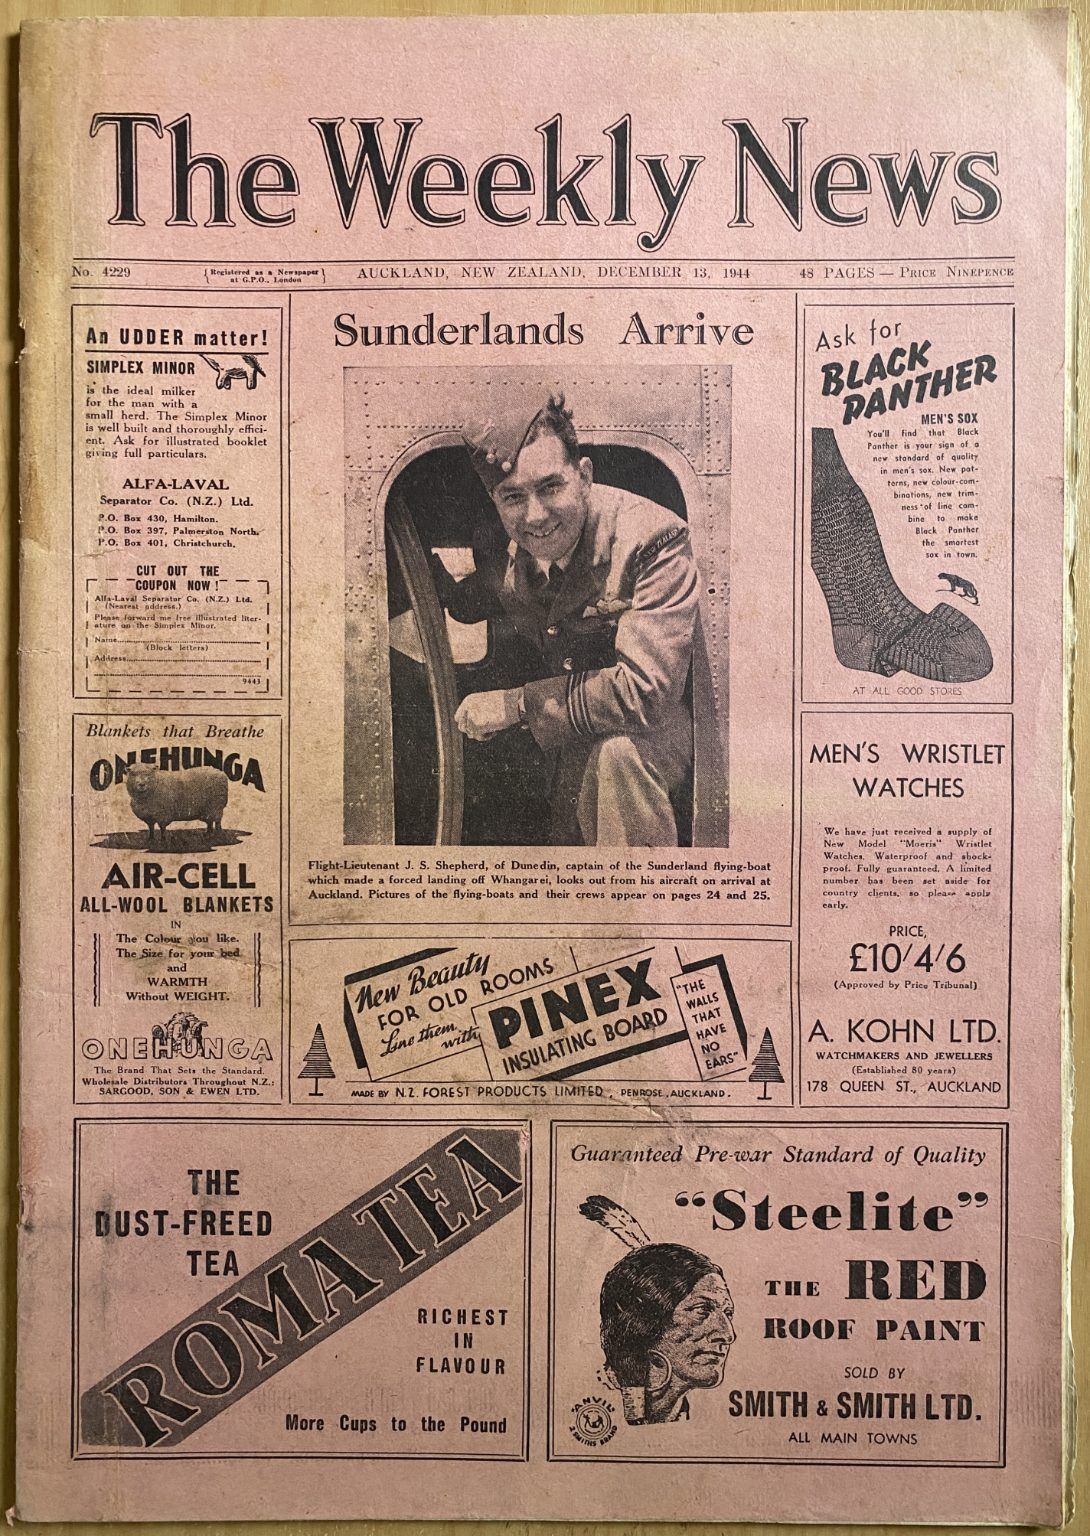 OLD NEWSPAPER: The Weekly News - No. 4229, 13 December 1944